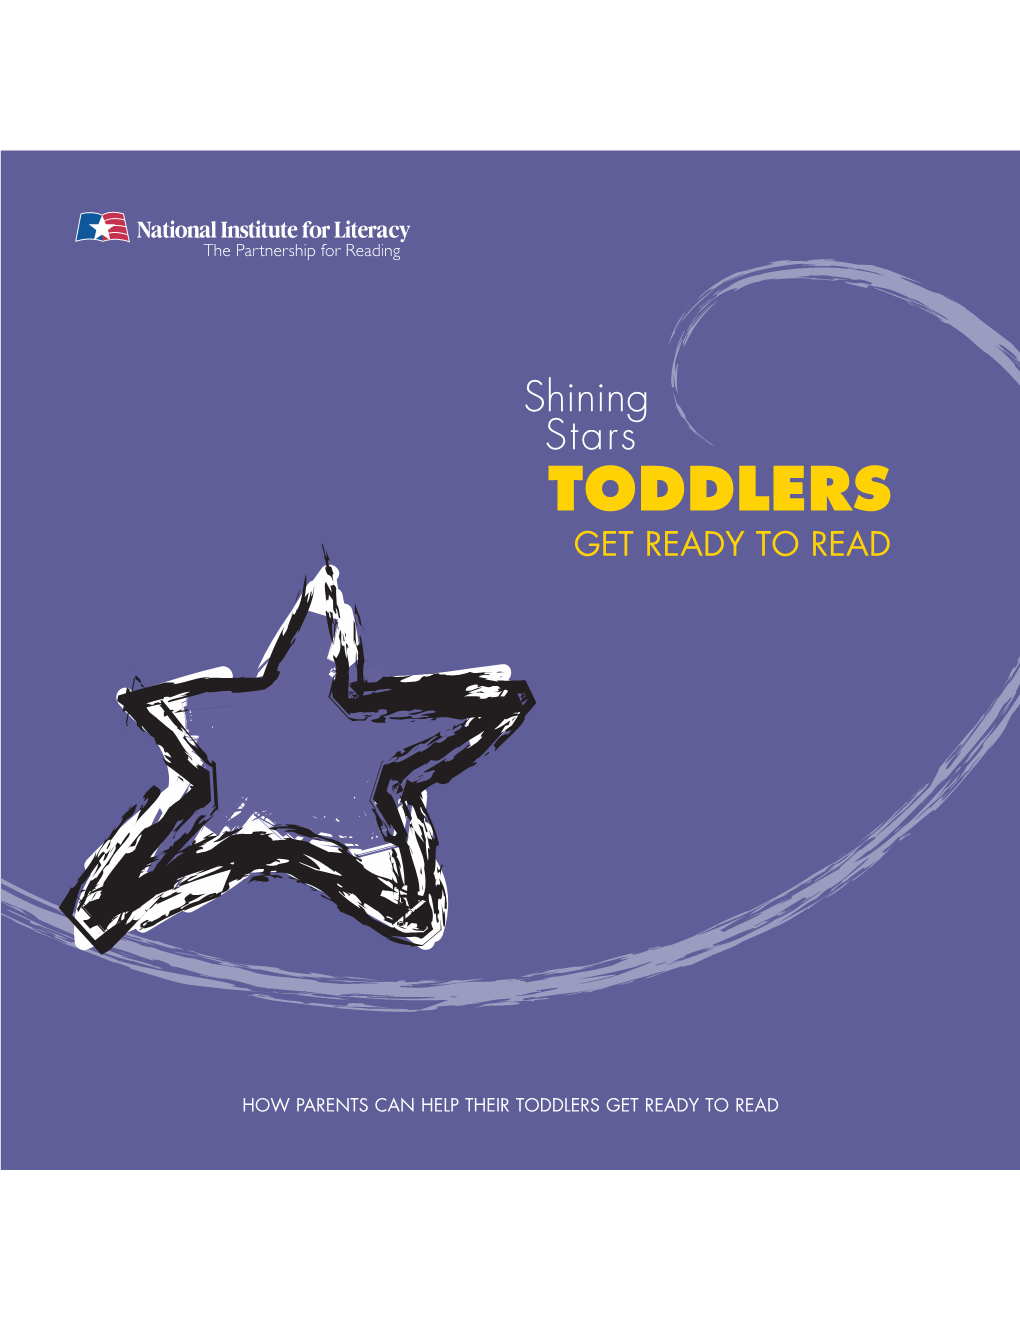 Shining Stars: Toddlers Get Ready to Read